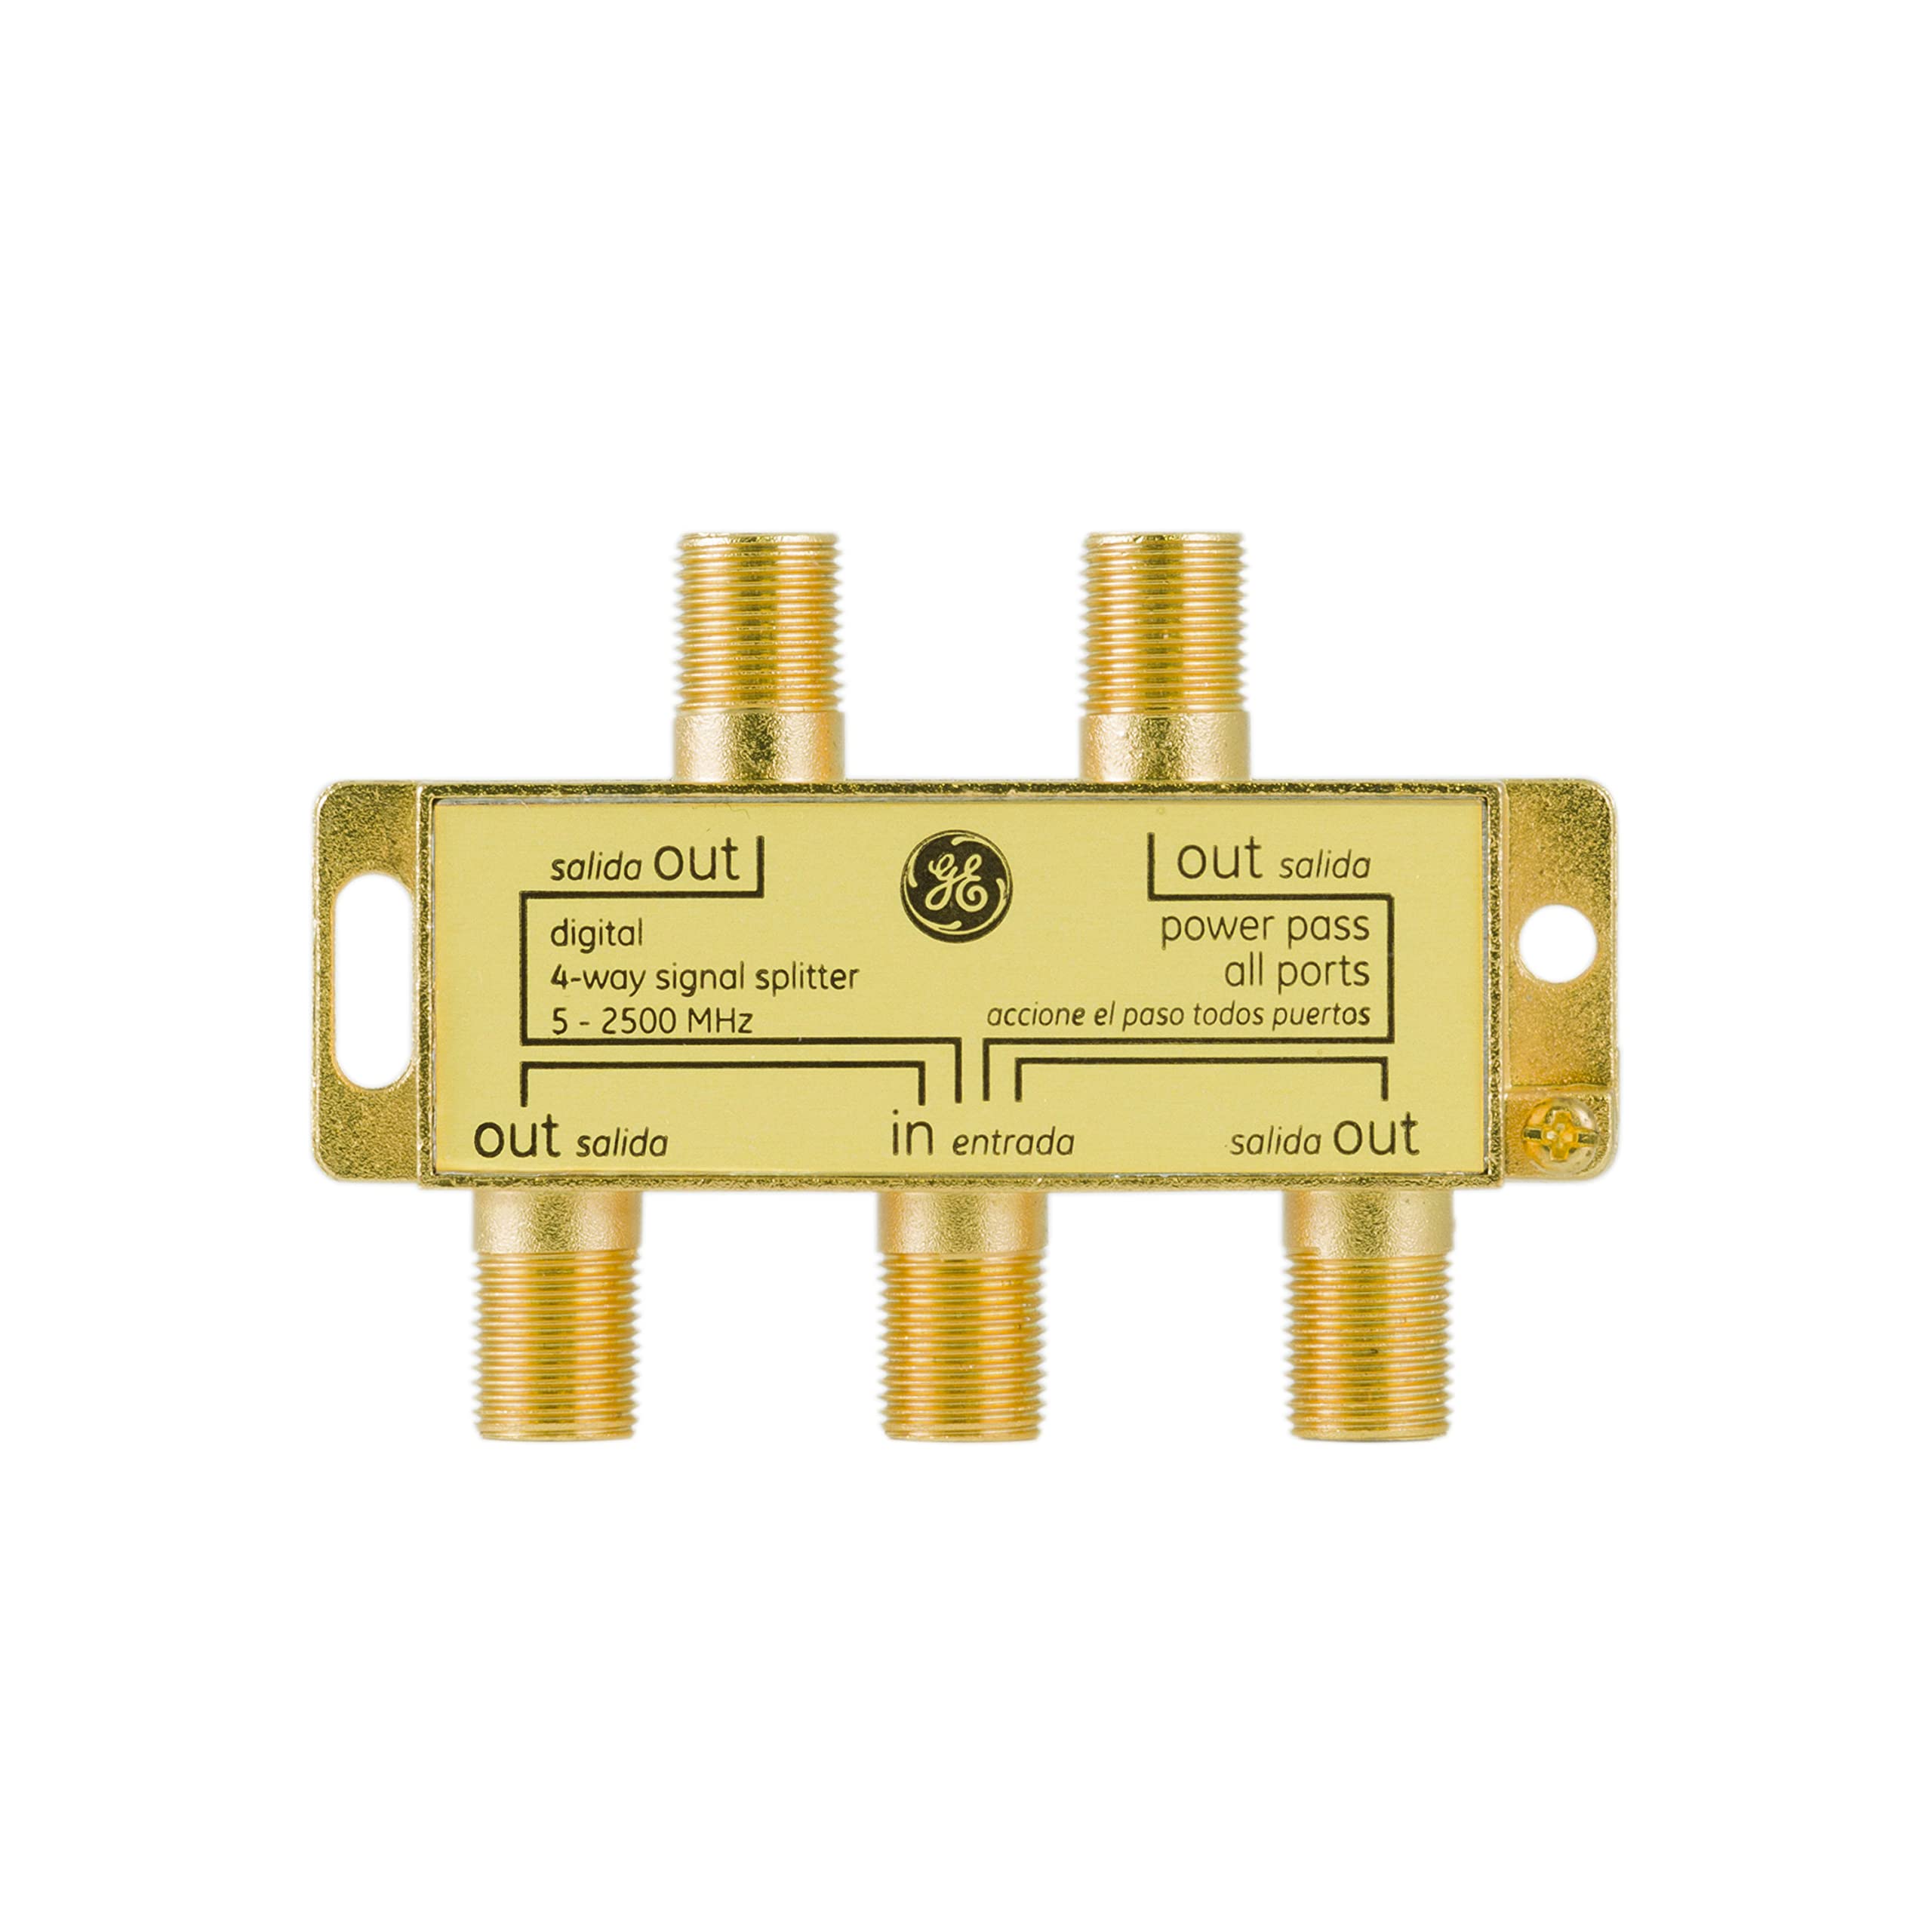 Book Cover GE Digital 4-Way Coaxial Cable Splitter, 2.5 GHz 5-2500 MHz, RG6 Compatible, Works with HD TV, Satellite, High Speed Internet, Amplifier, Antenna, Gold Plated Connectors, Corrosion Resistant, 33527 1 Pack